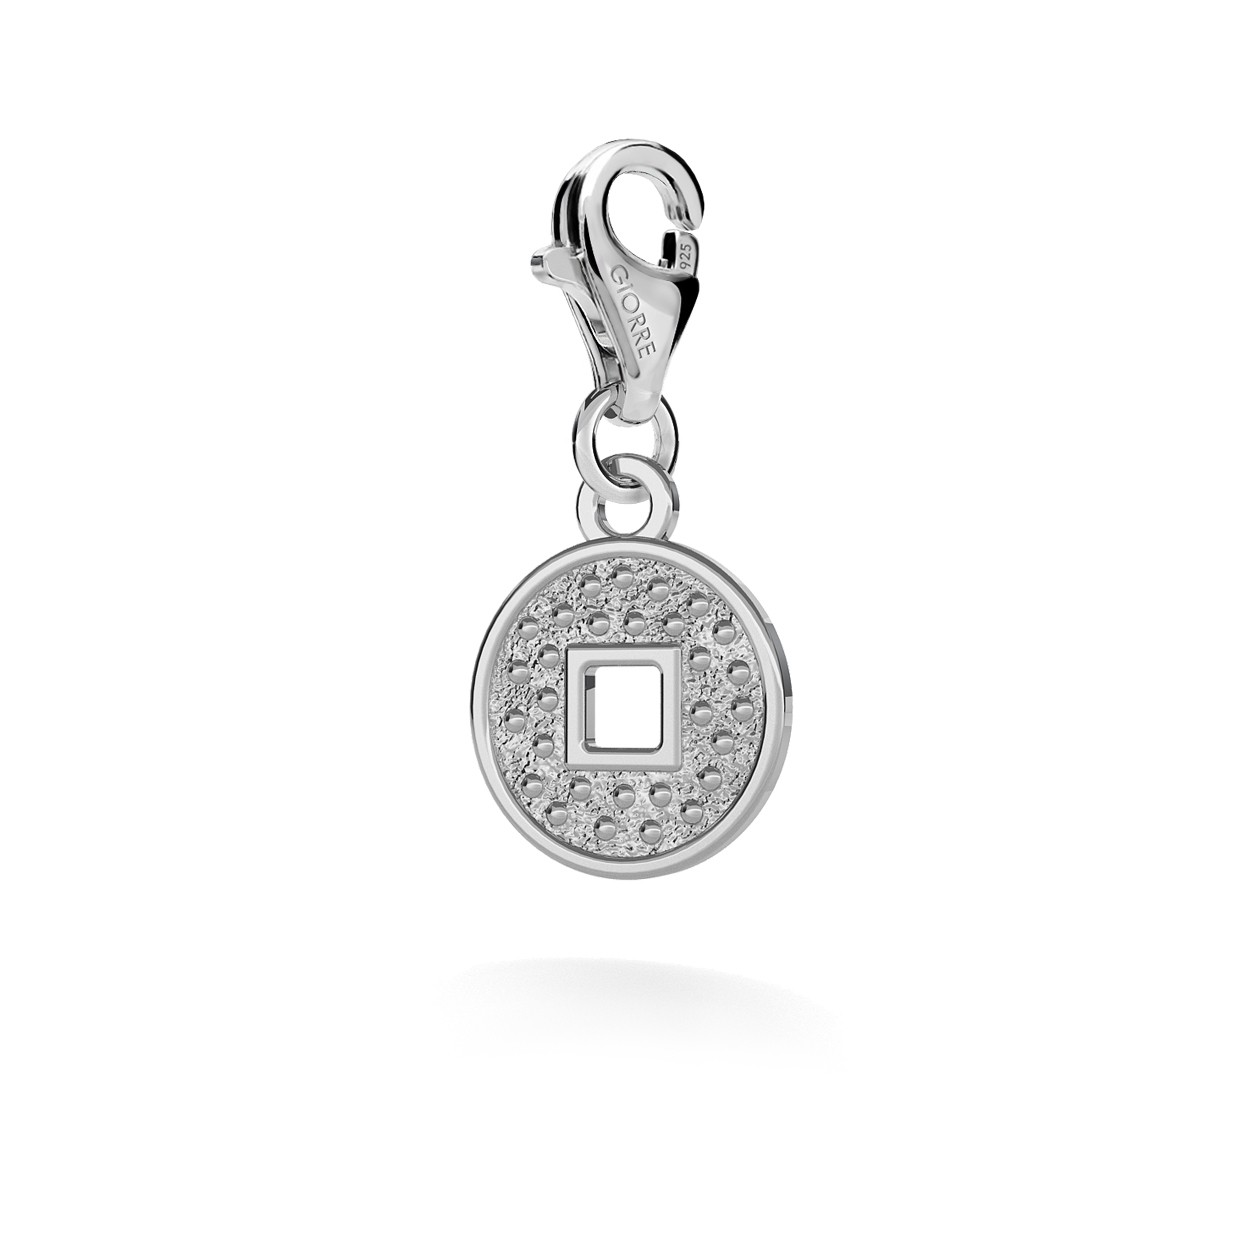 CHARM 40, CHINESE COIN, SILVER 925, RHODIUM OR GOLD PLATED